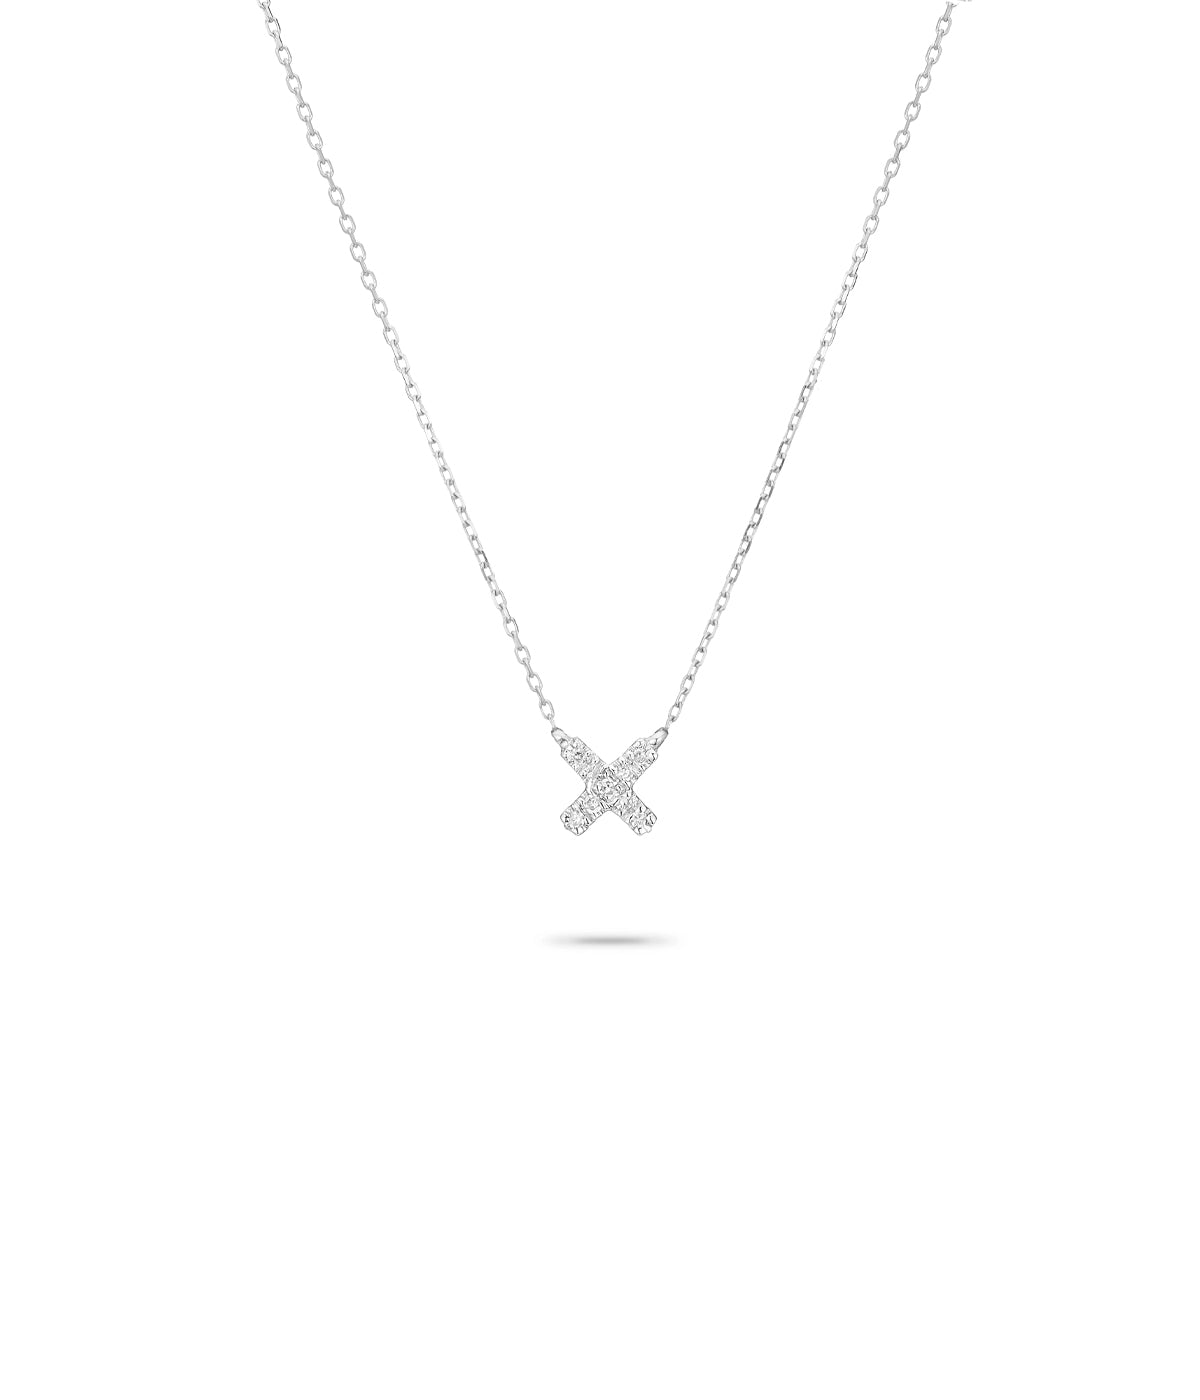 Super Tiny Pave X Necklace in Silver